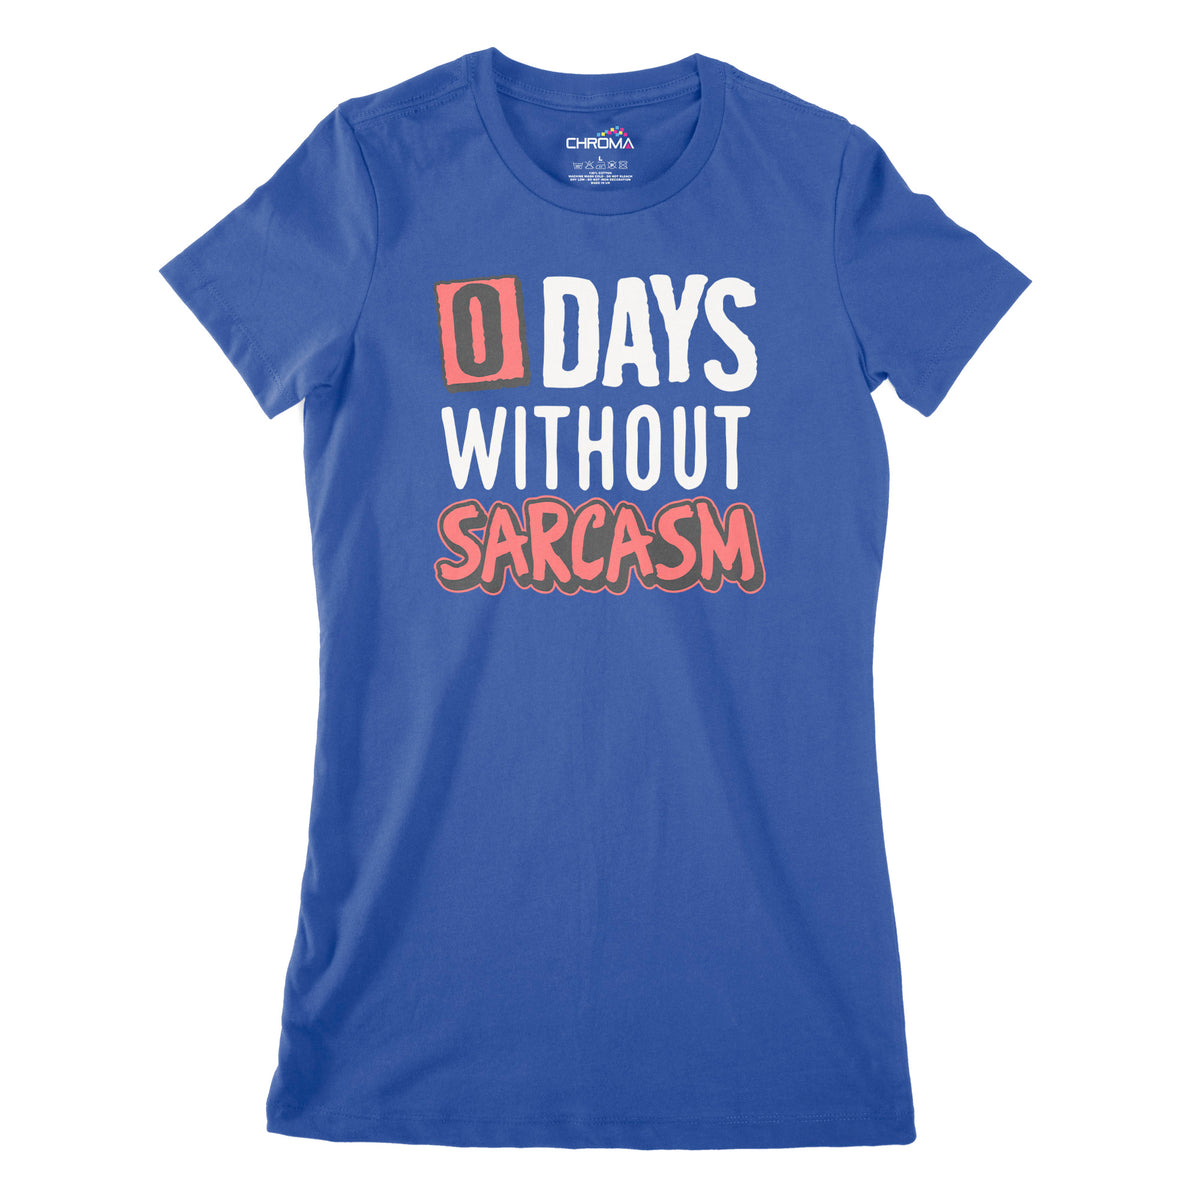 0 Days Without Sarcasm | Women's Classic Fitted T-Shirt Chroma Clothing